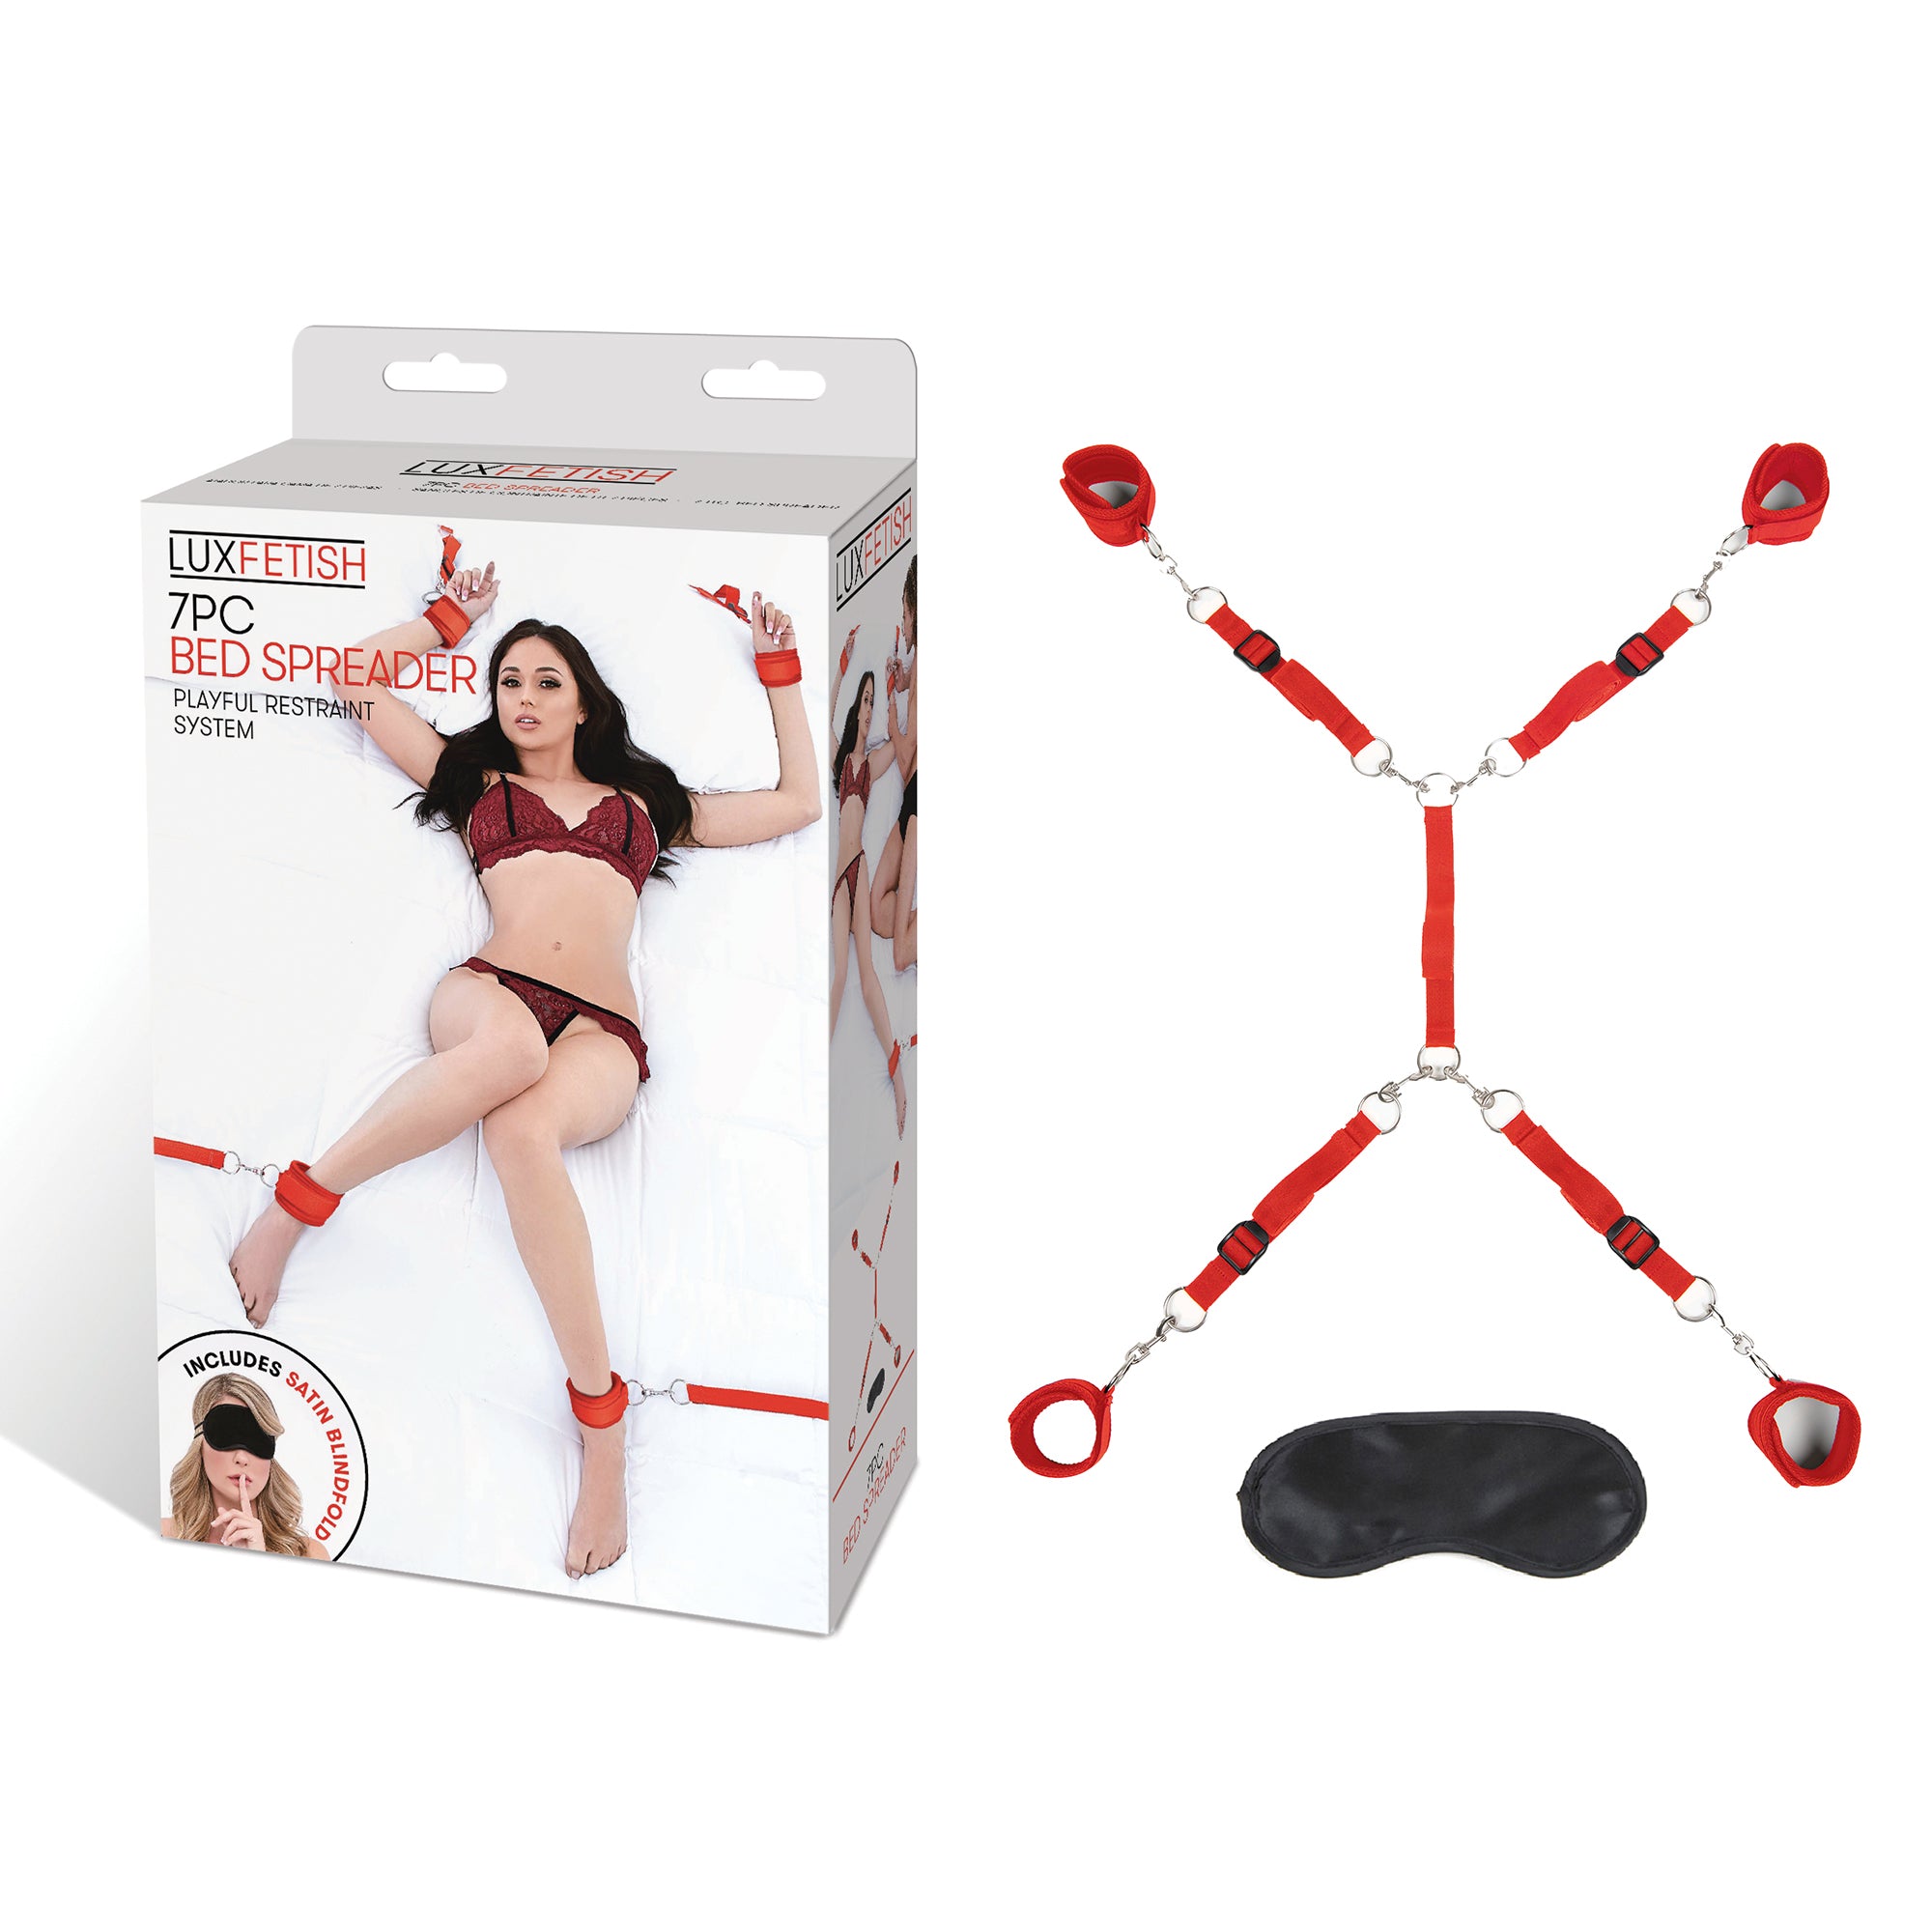 7 PC Bed Spreader - Red